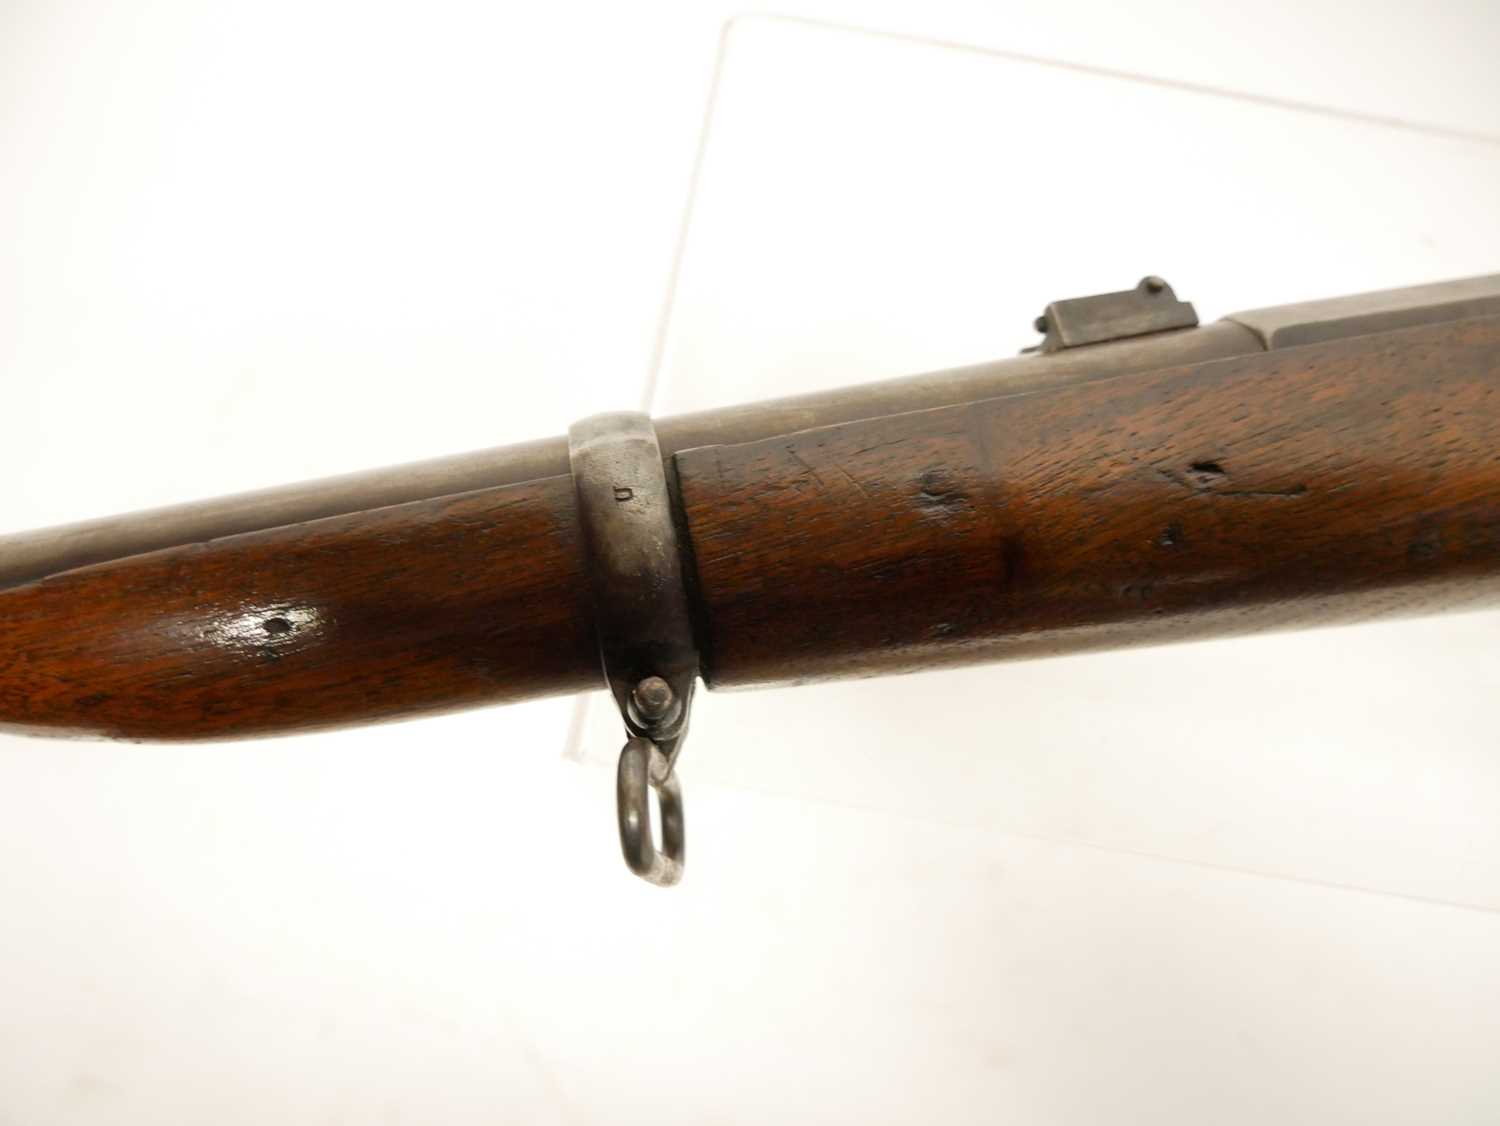 Remington .43 Spanish rolling block carbine, converted from a full length rifle, 20 inch barrel, - Image 12 of 13